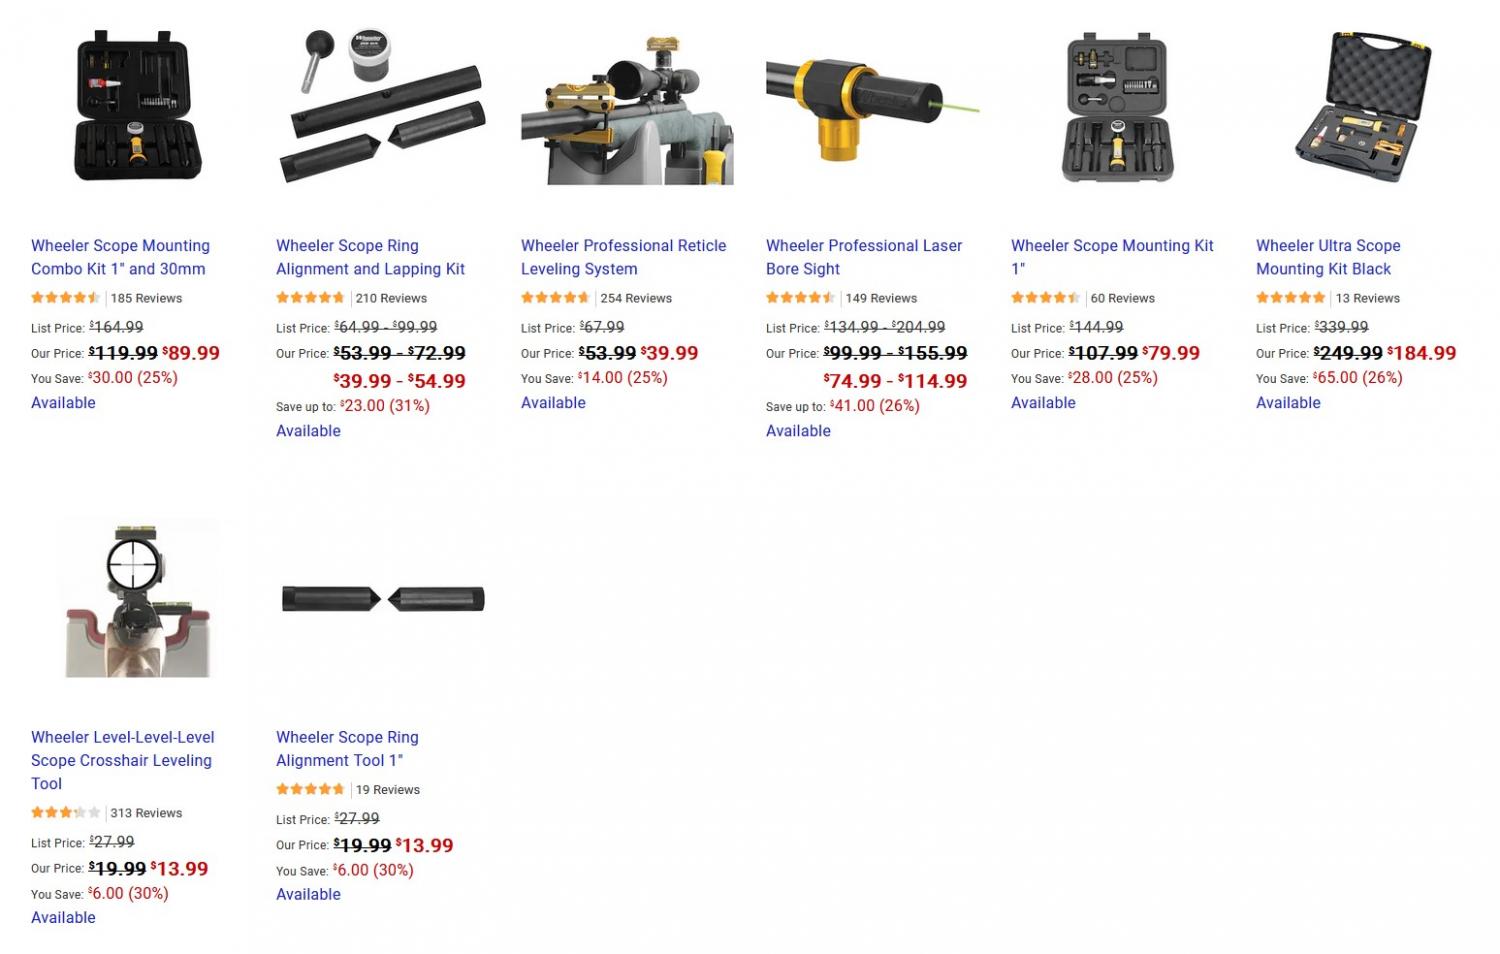 All Wheeler Scope Mounting Tools on Sale